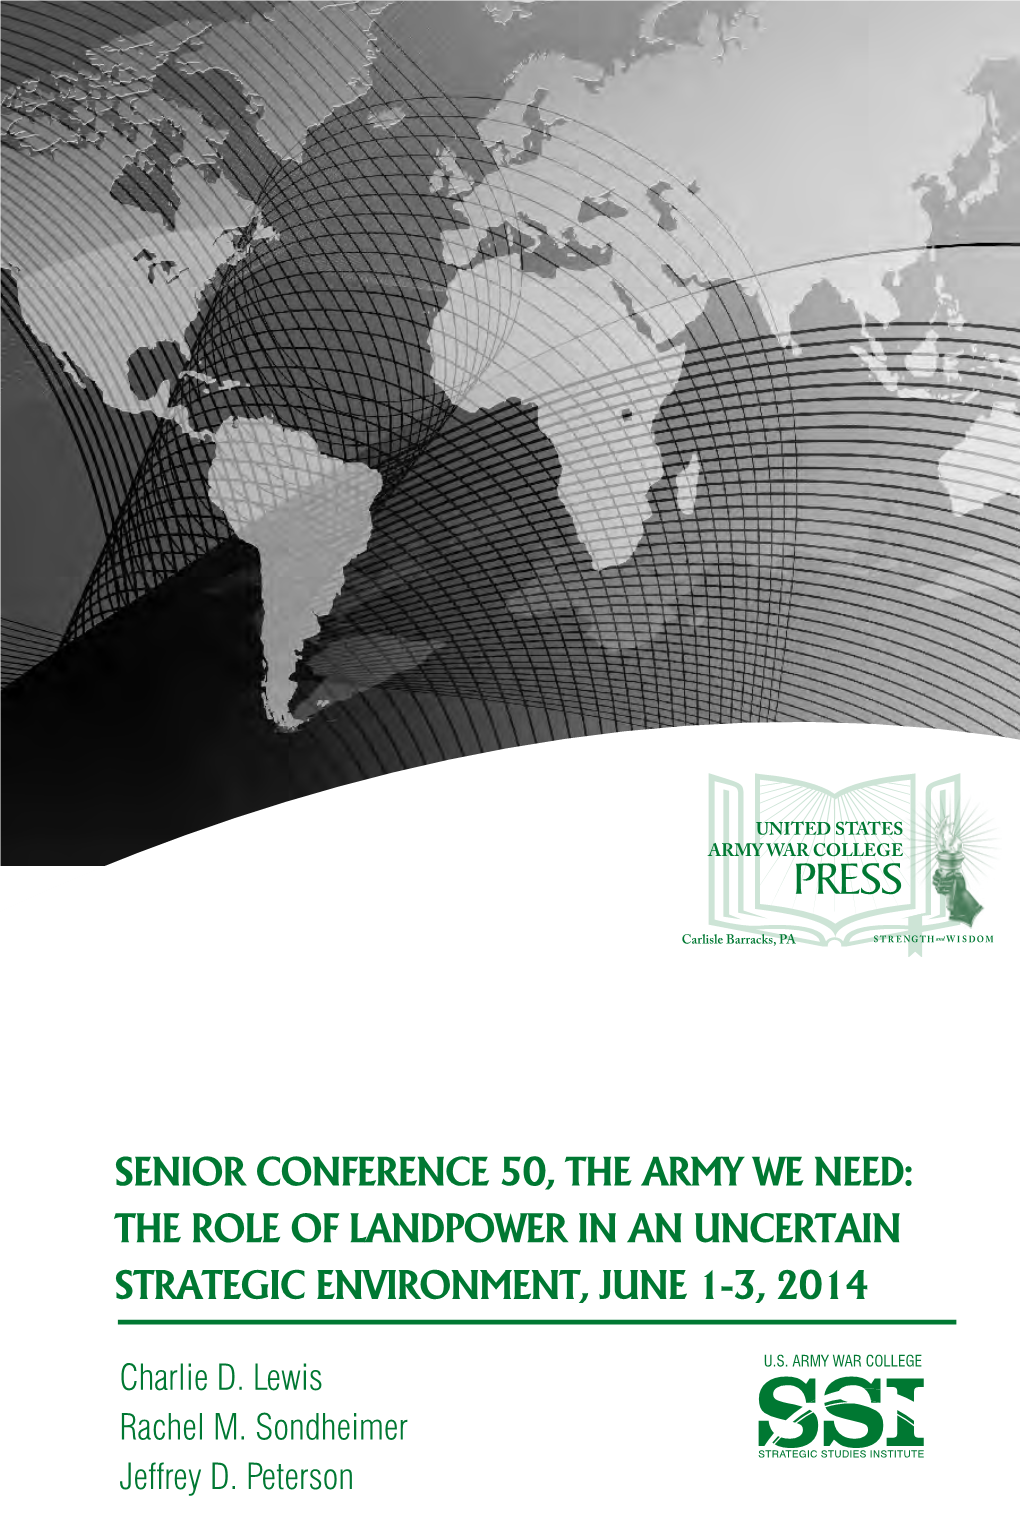 Senior Conference 50, the Army We Need: the Role of Landpower in an Uncertain Strategic Environment, June 1-3, 2014